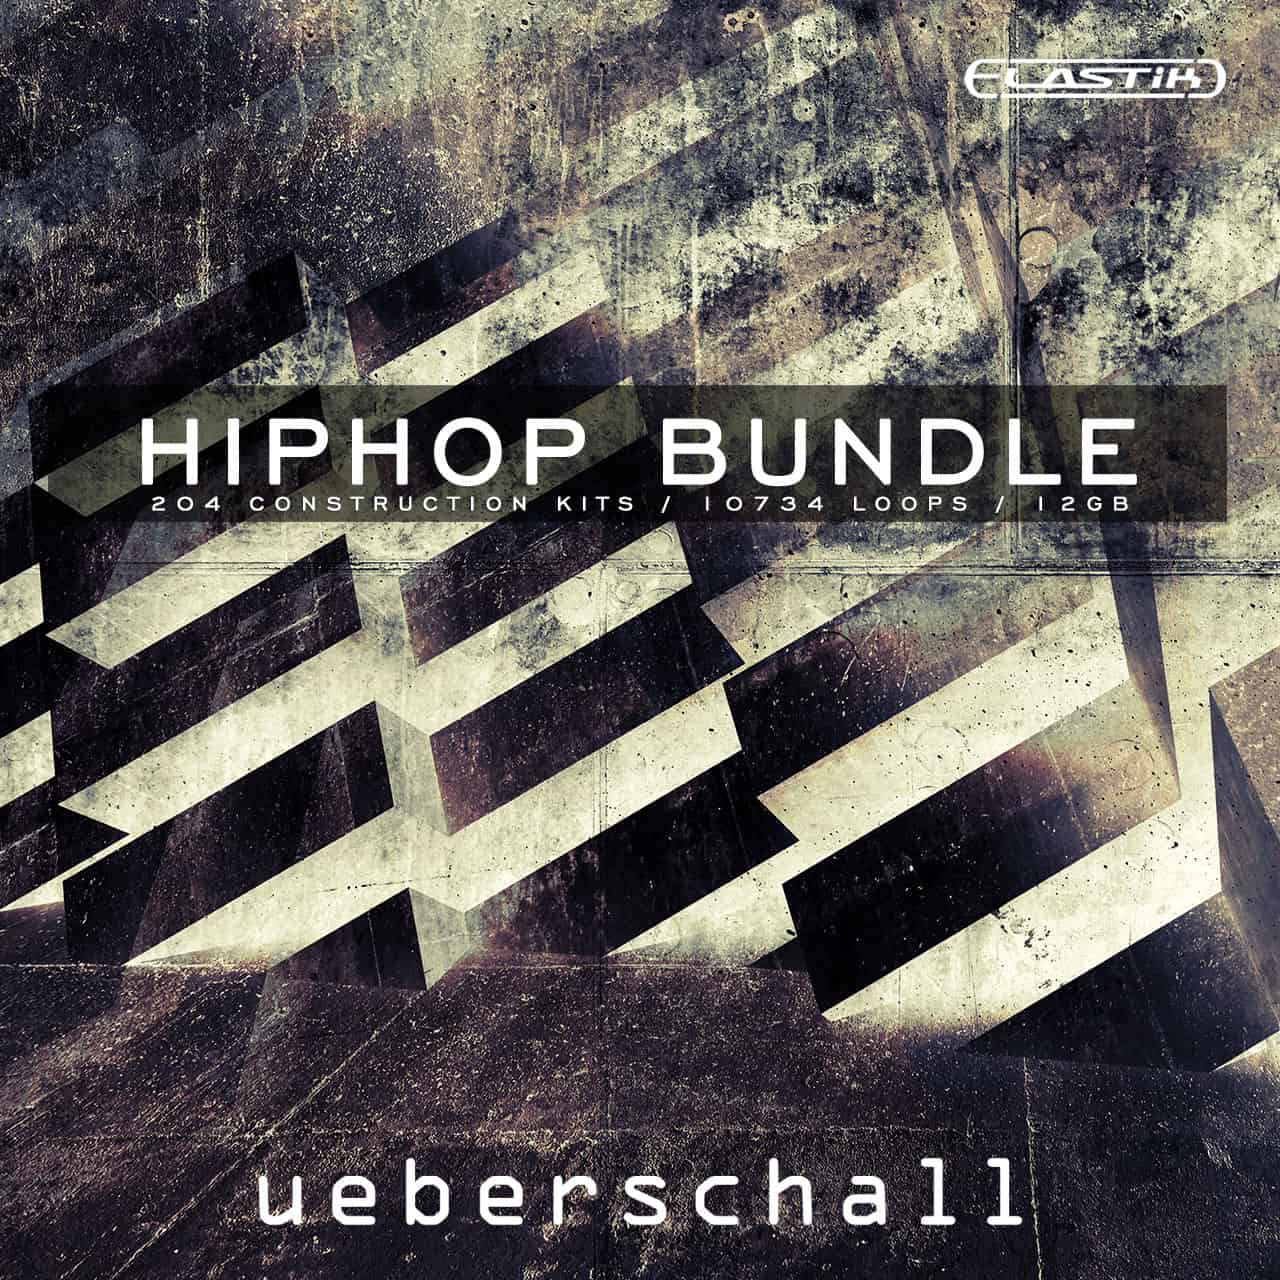 Hip Hop Bundle by Ueberschall – The Sample Meisters from Germany